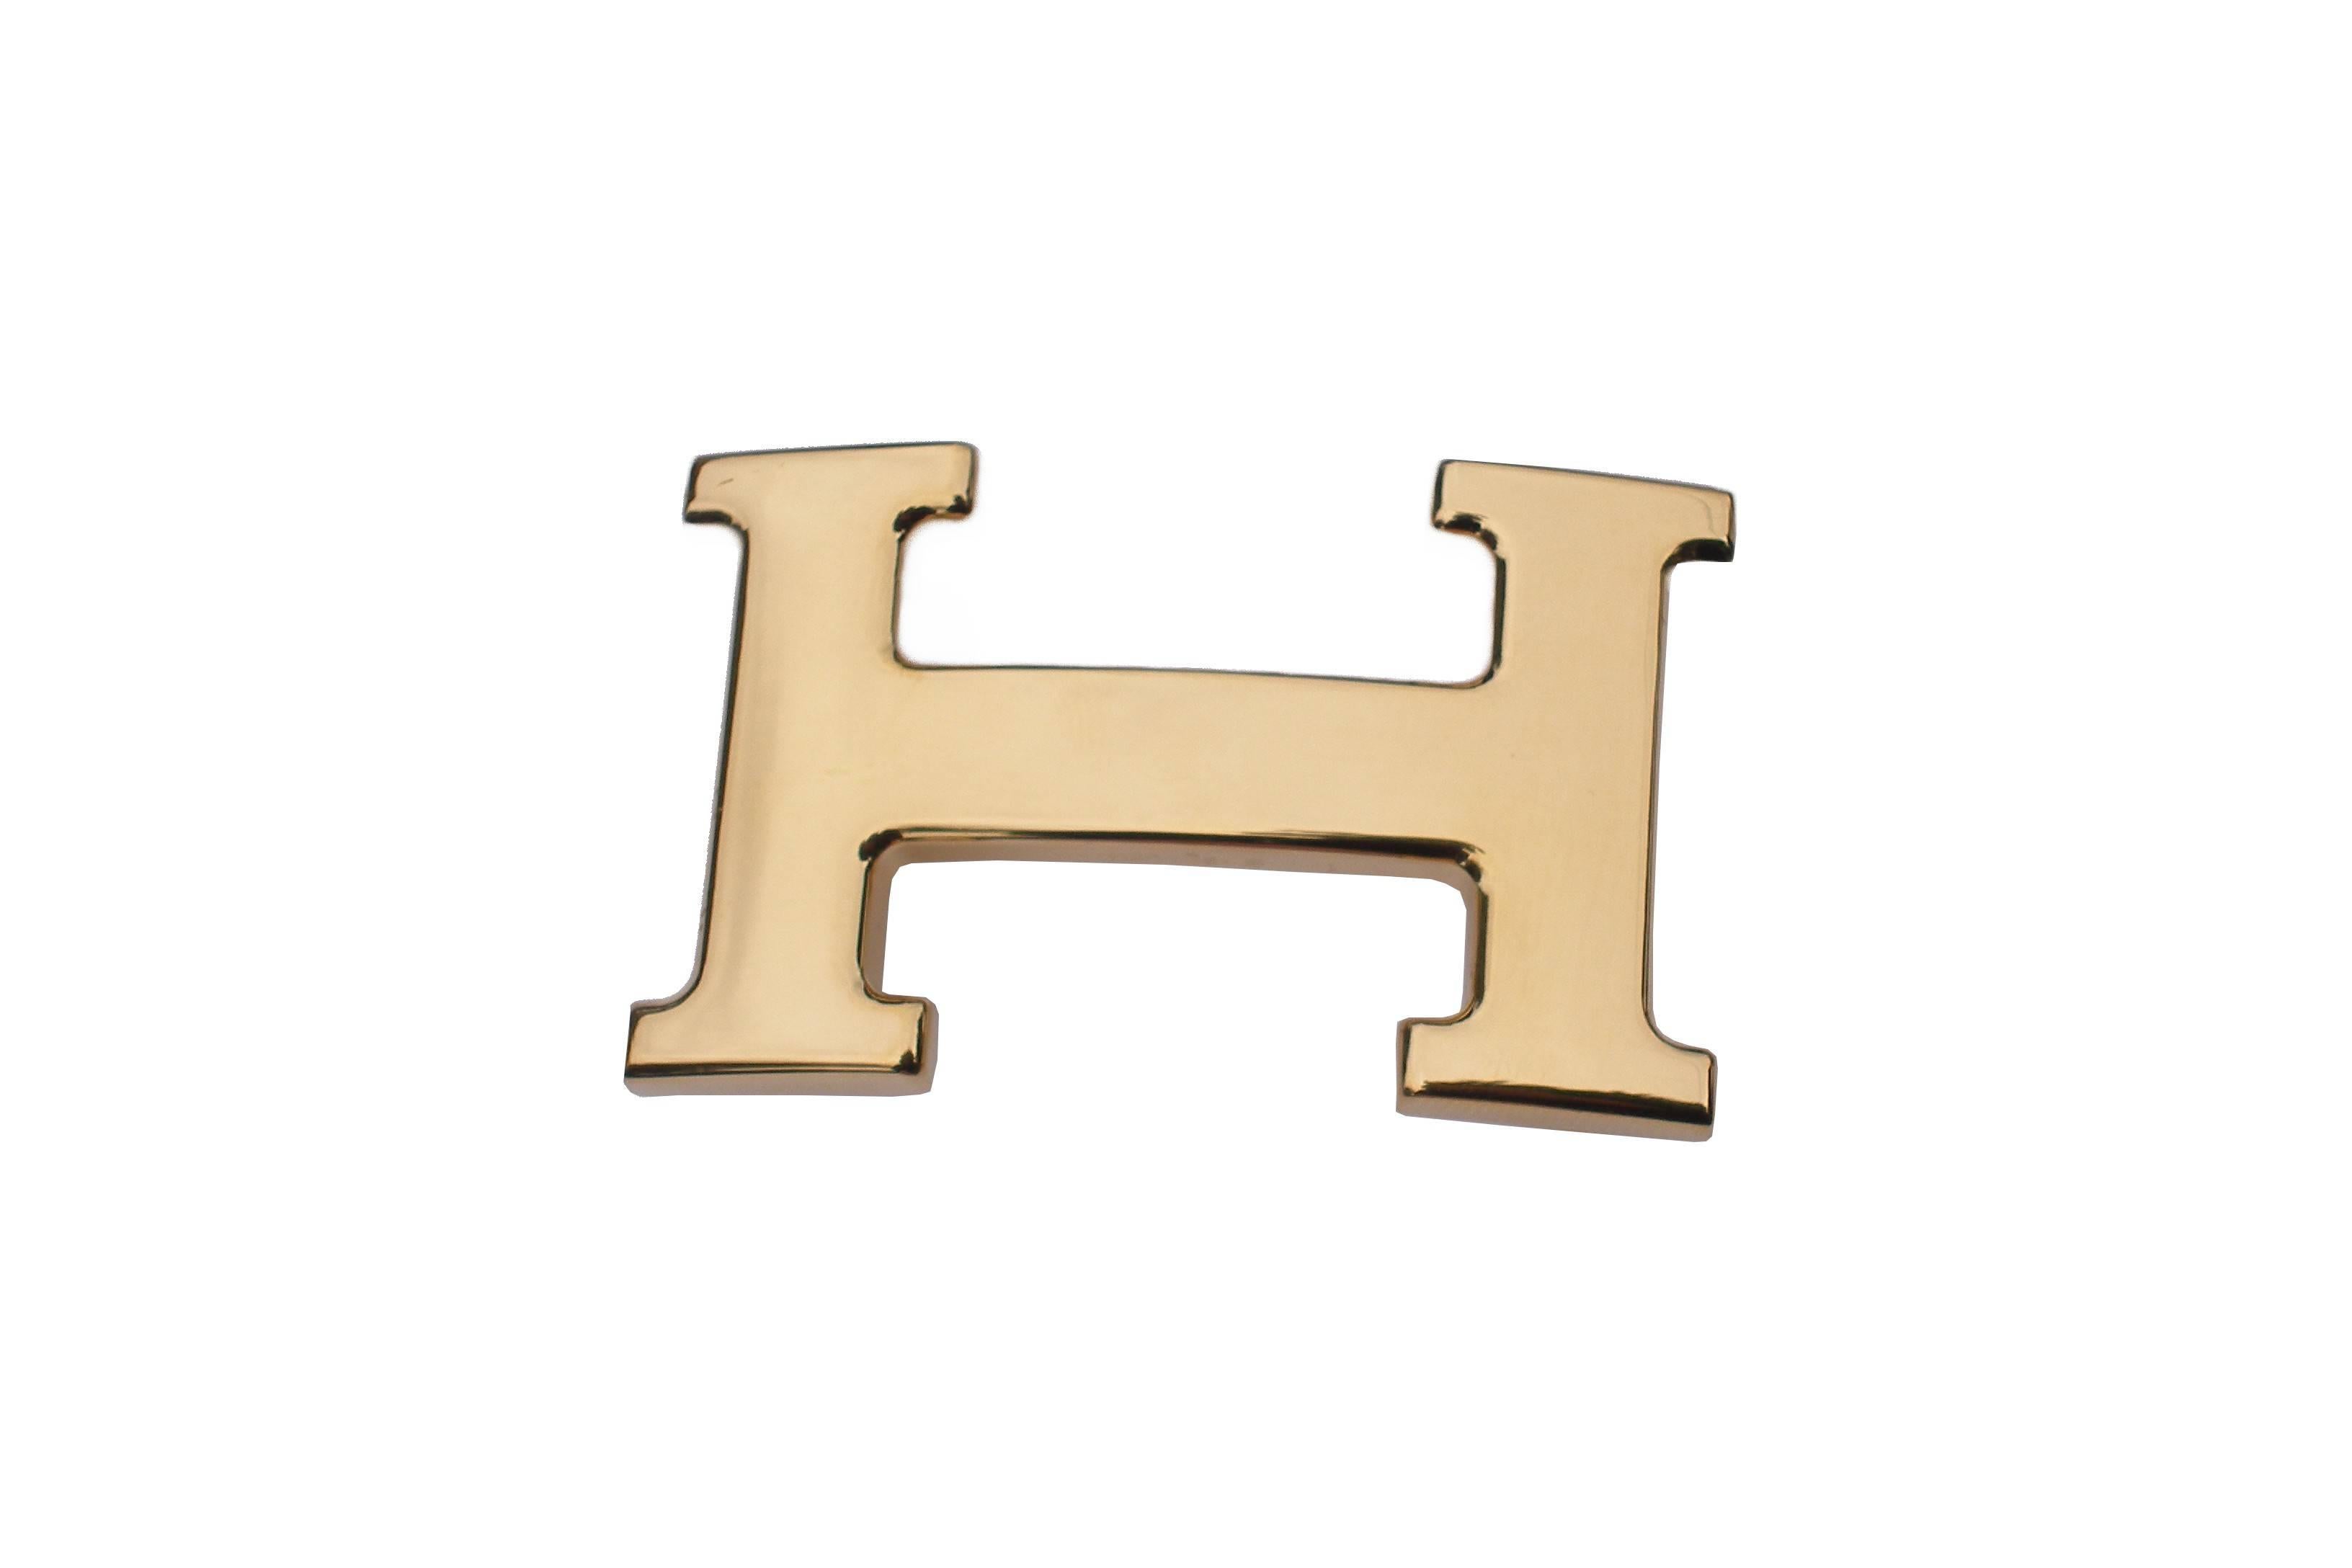  HERMES H Constance Belt Buckle Gold Plated / BRAND NEW  2